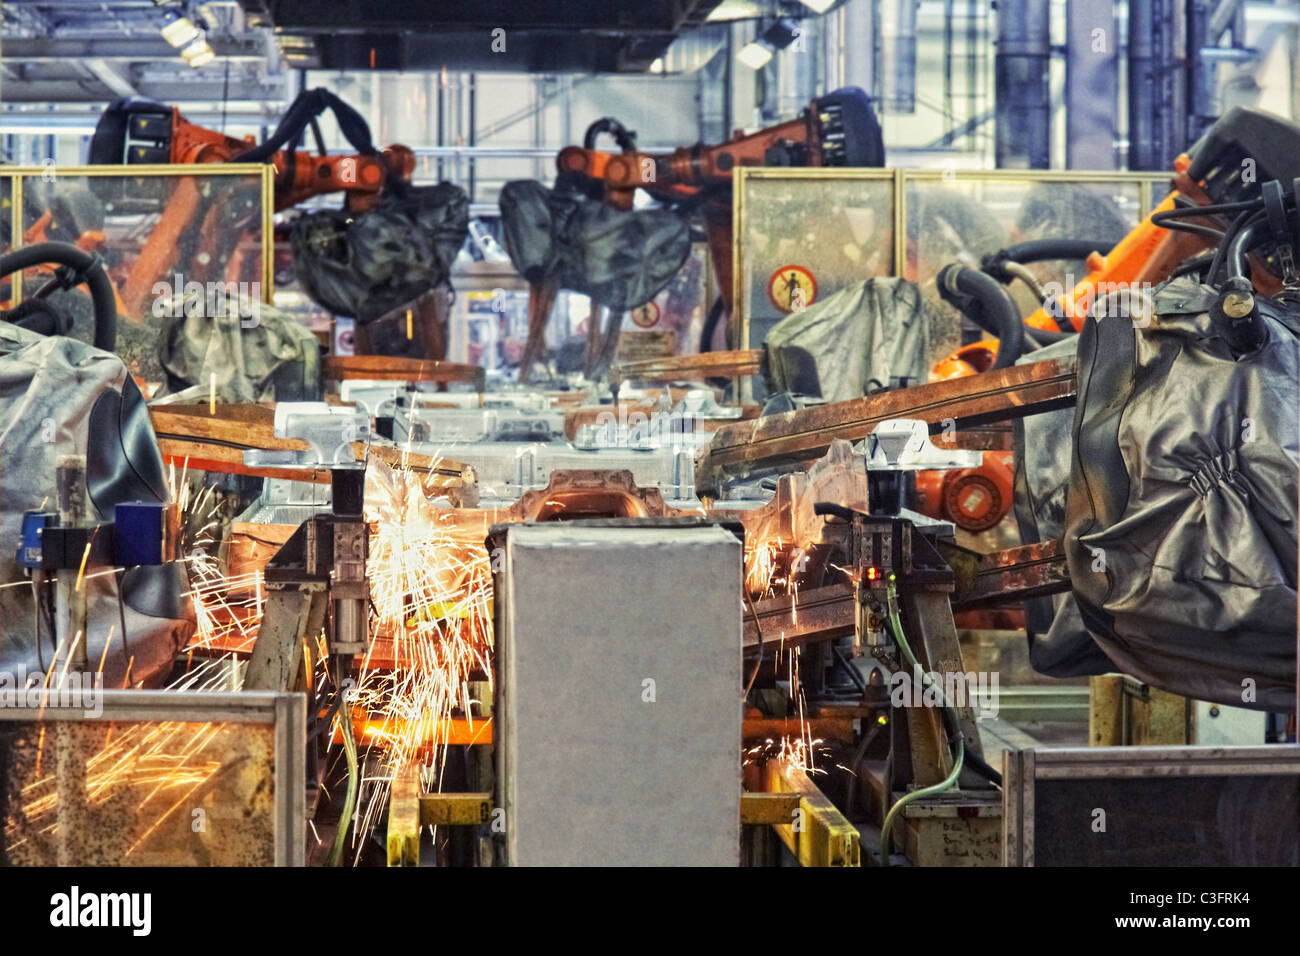 robots welding in a car factory Stock Photo